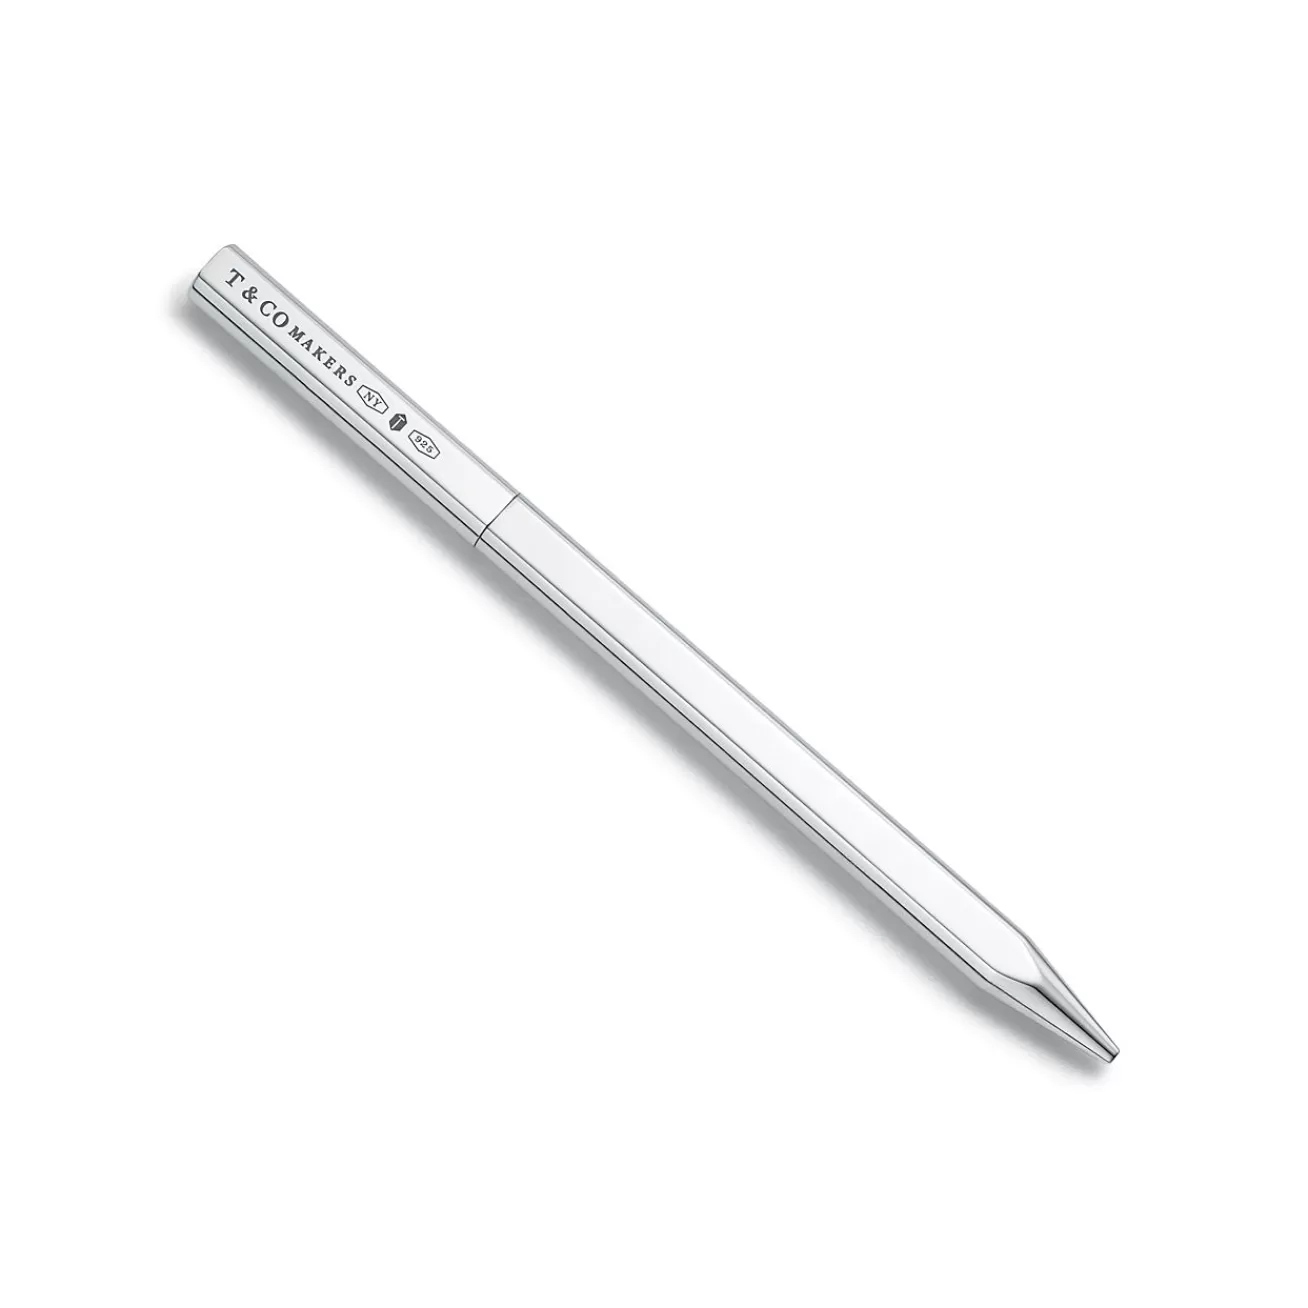 Tiffany & Co. Tiffany 1837 Makers ballpoint pen in sterling silver. | ^ Him | Gifts for Him